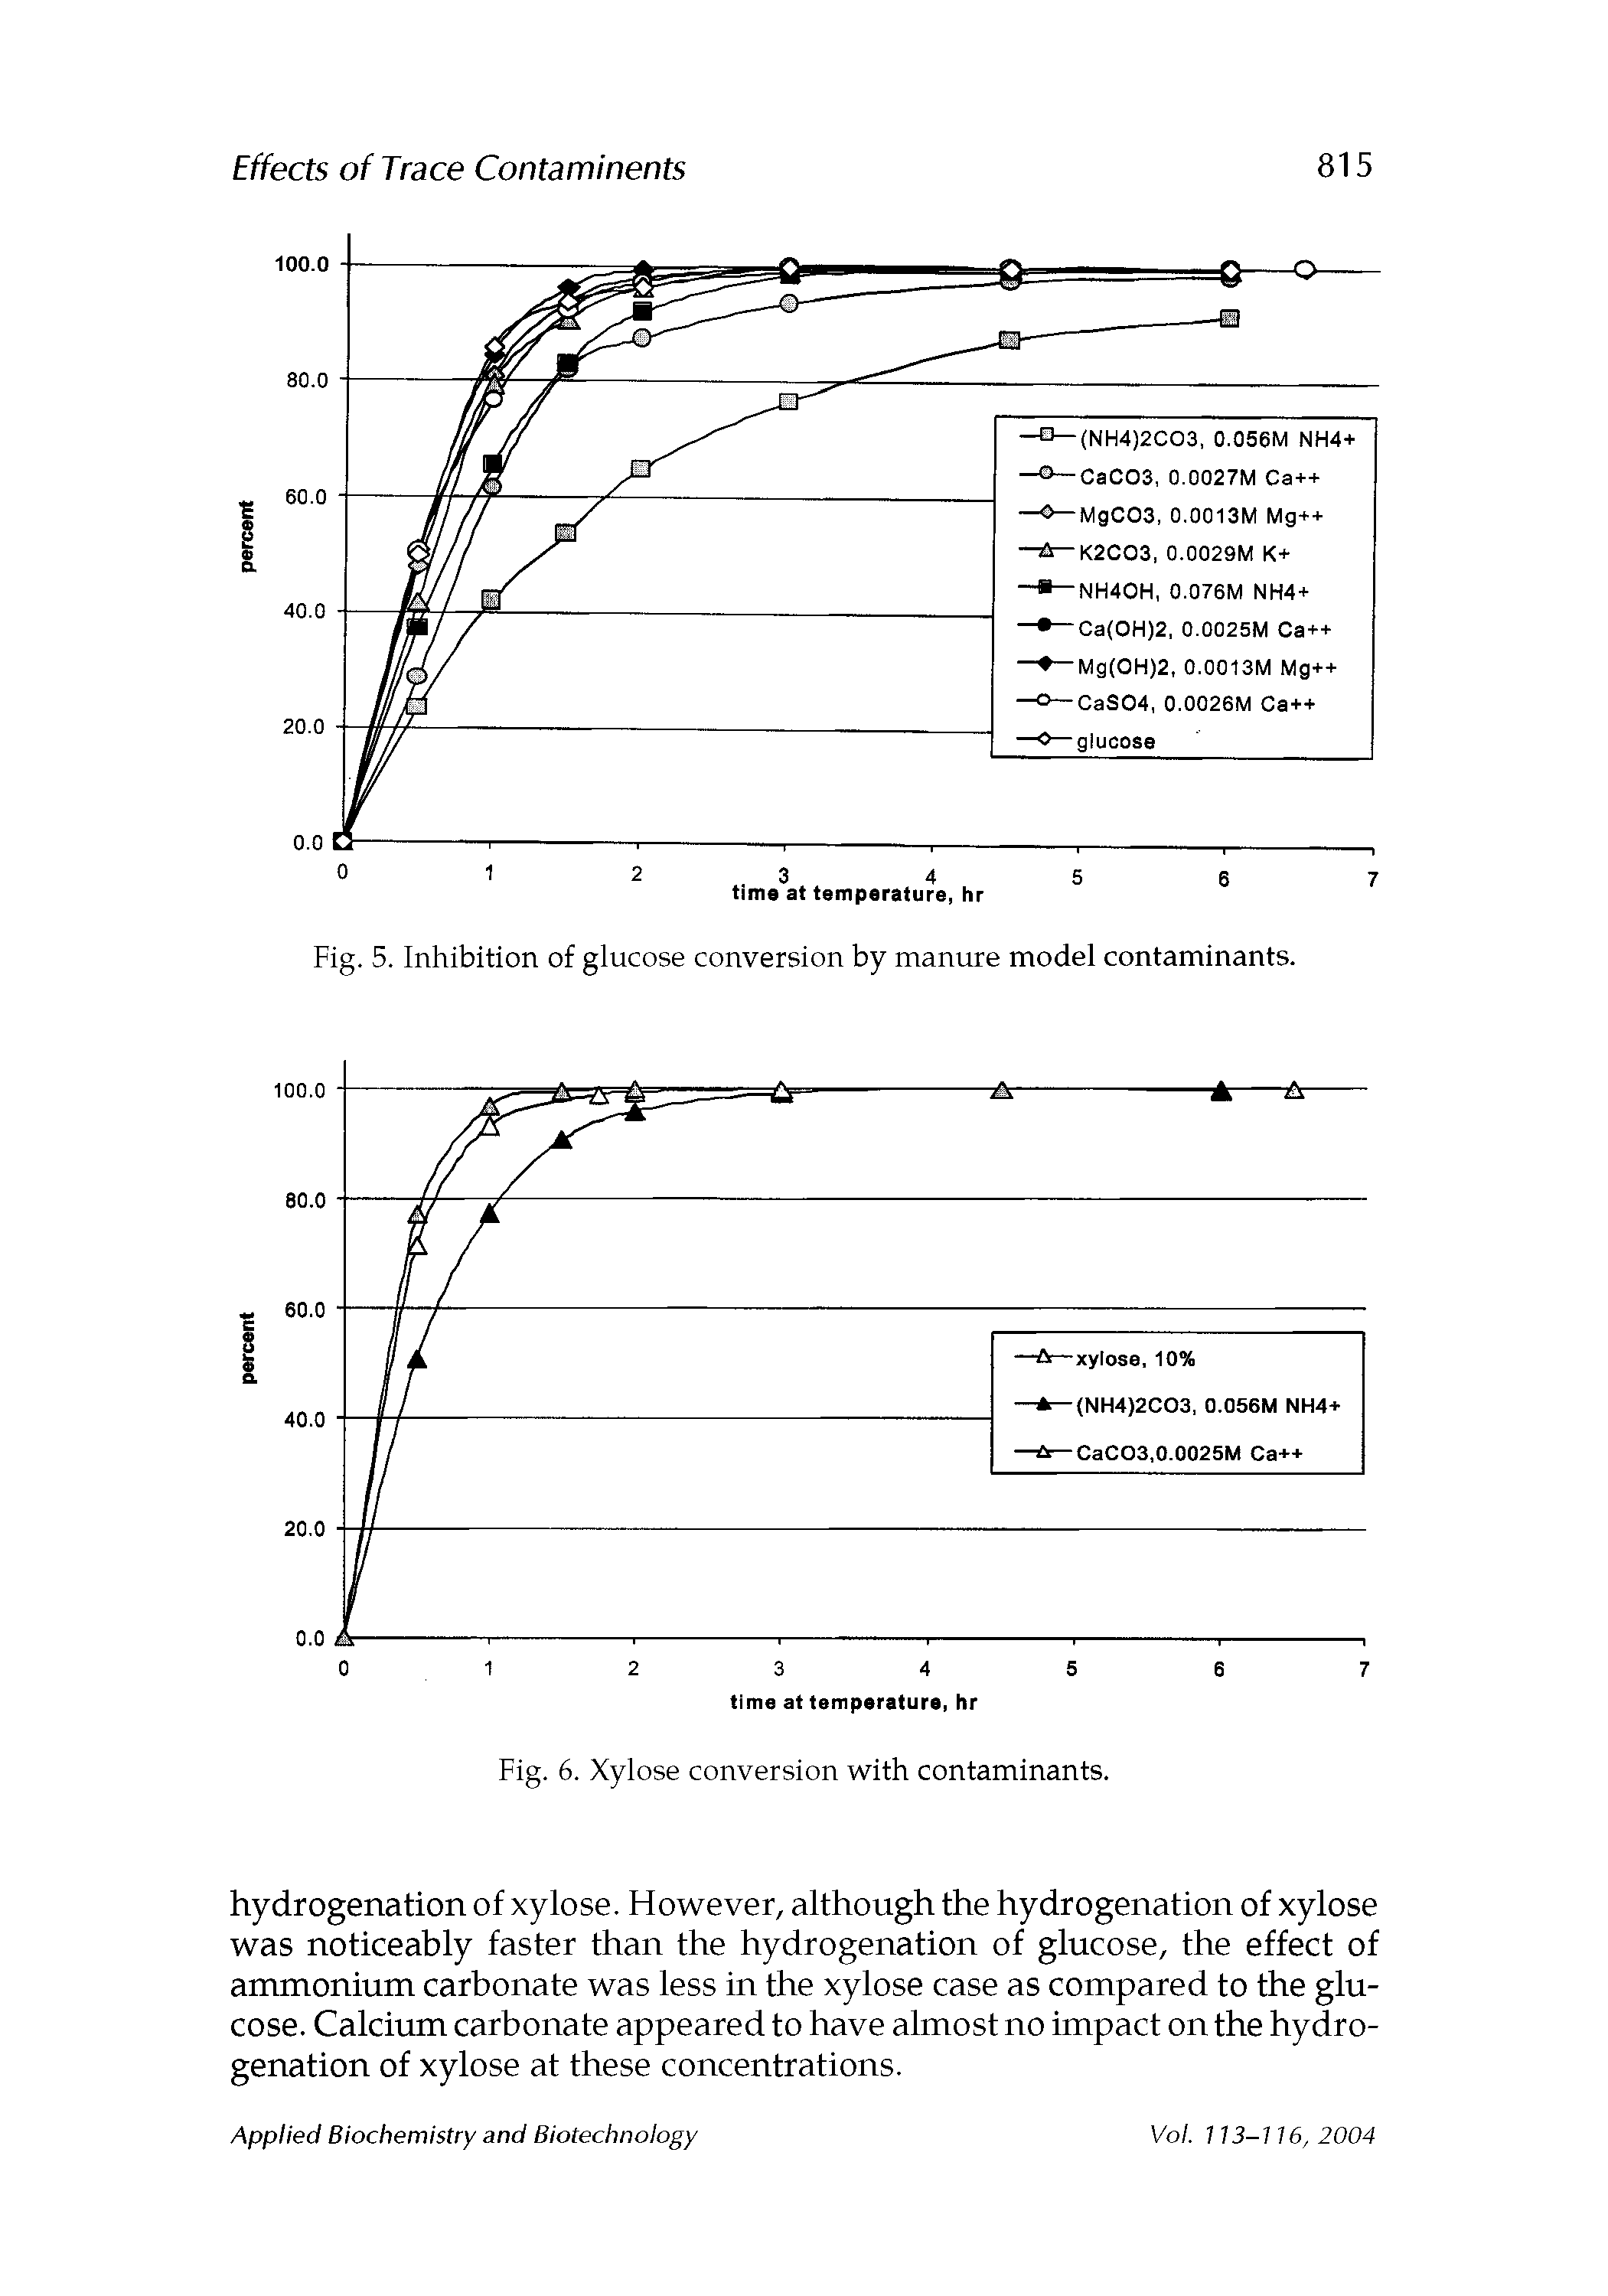 Fig. 5. Inhibition of glucose conversion by manure model contaminants.